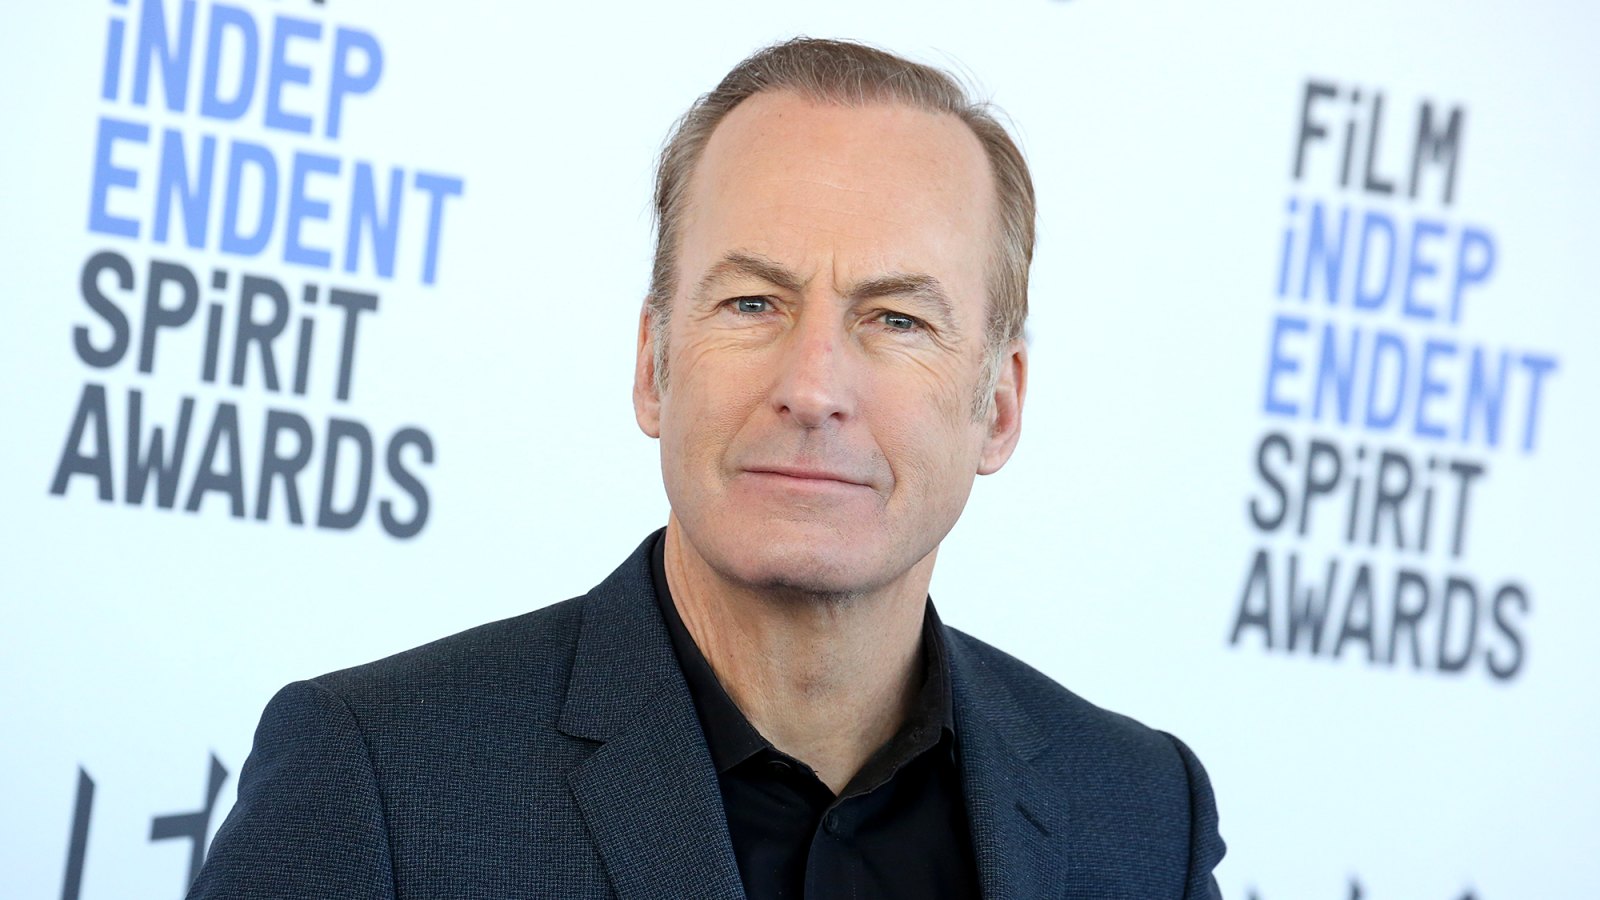 Bob Odenkirk Reflects on ‘Heart Incident’ Last Year: ‘A Pretty Shocking Day on Set’